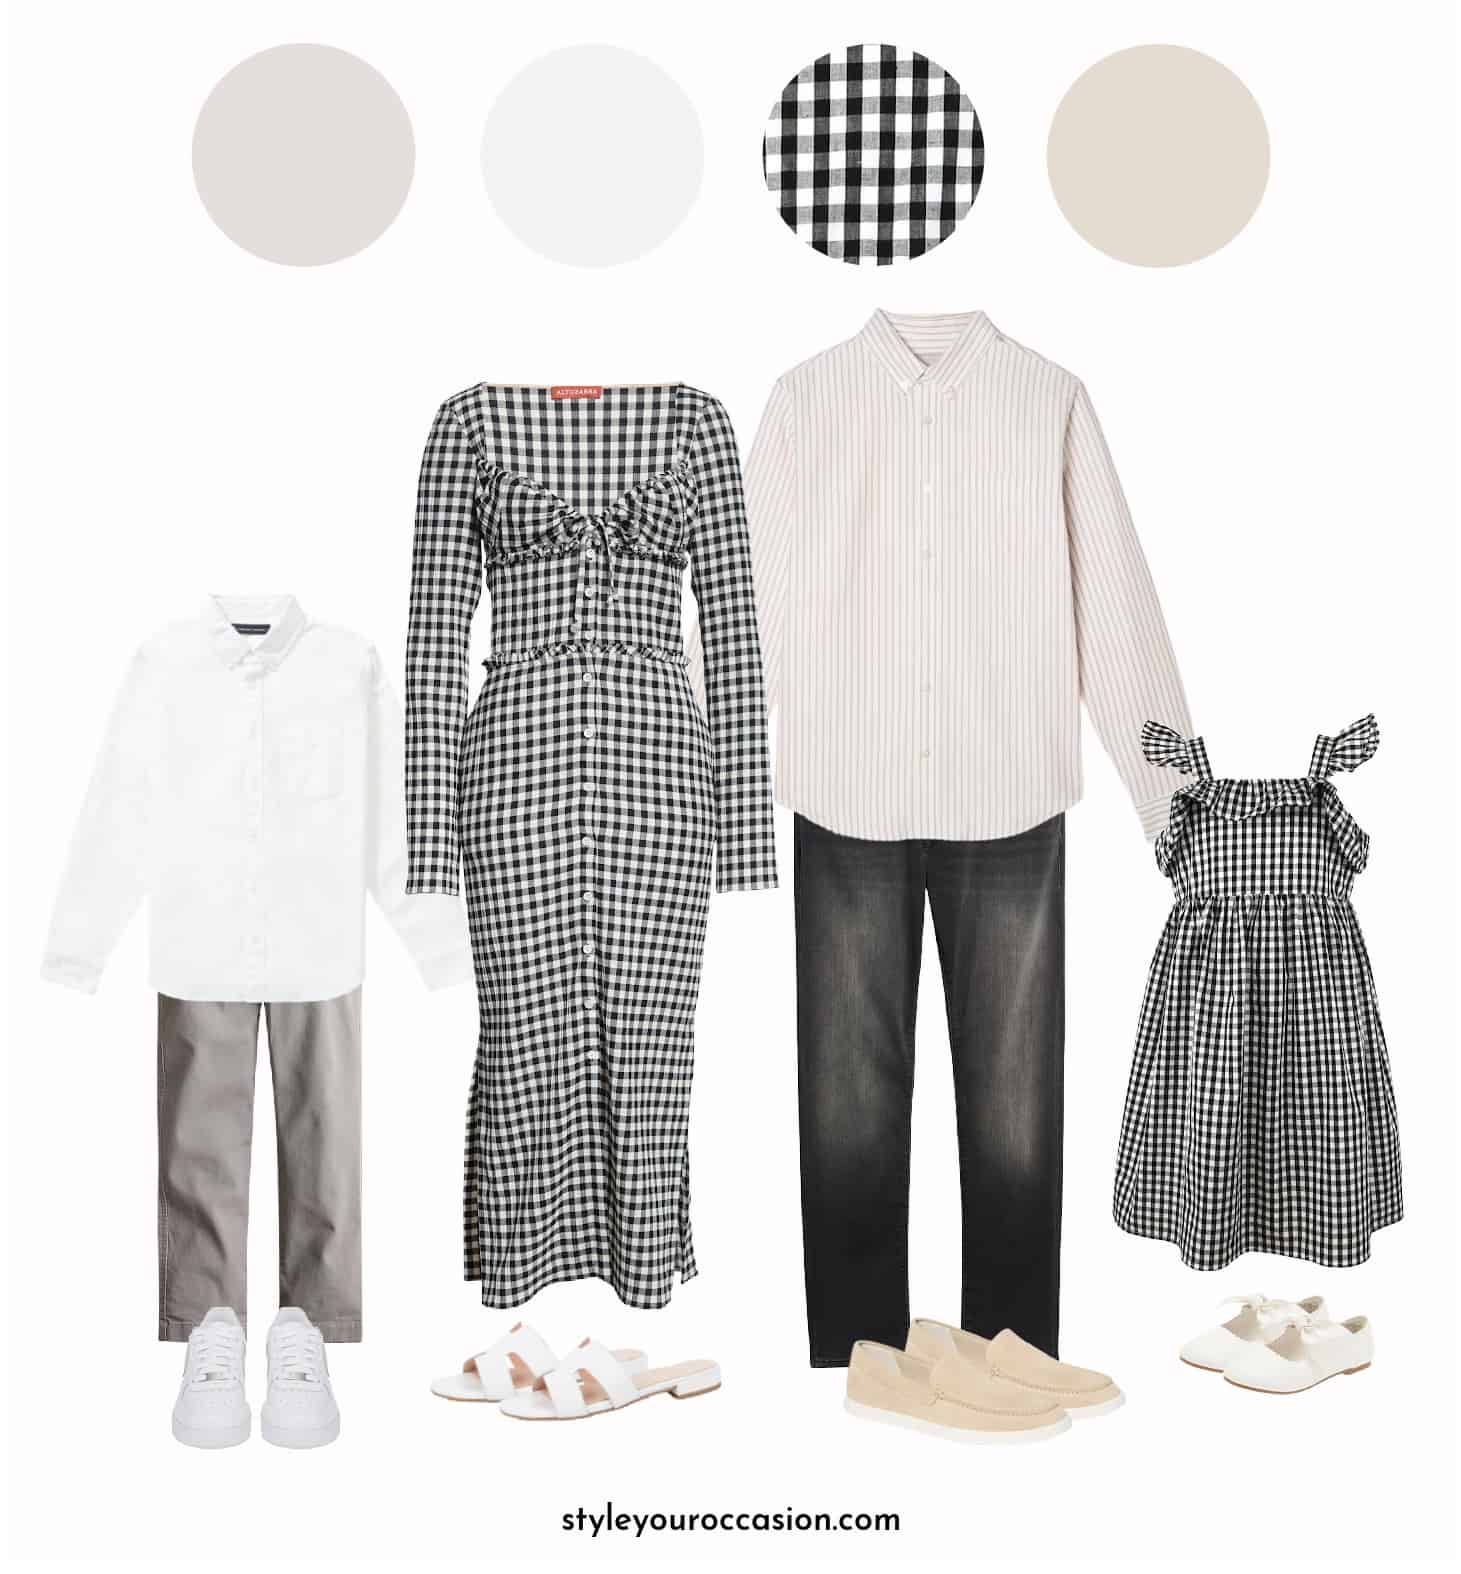 mood board of a family photo outfit guide with black and white gingham and neutrals